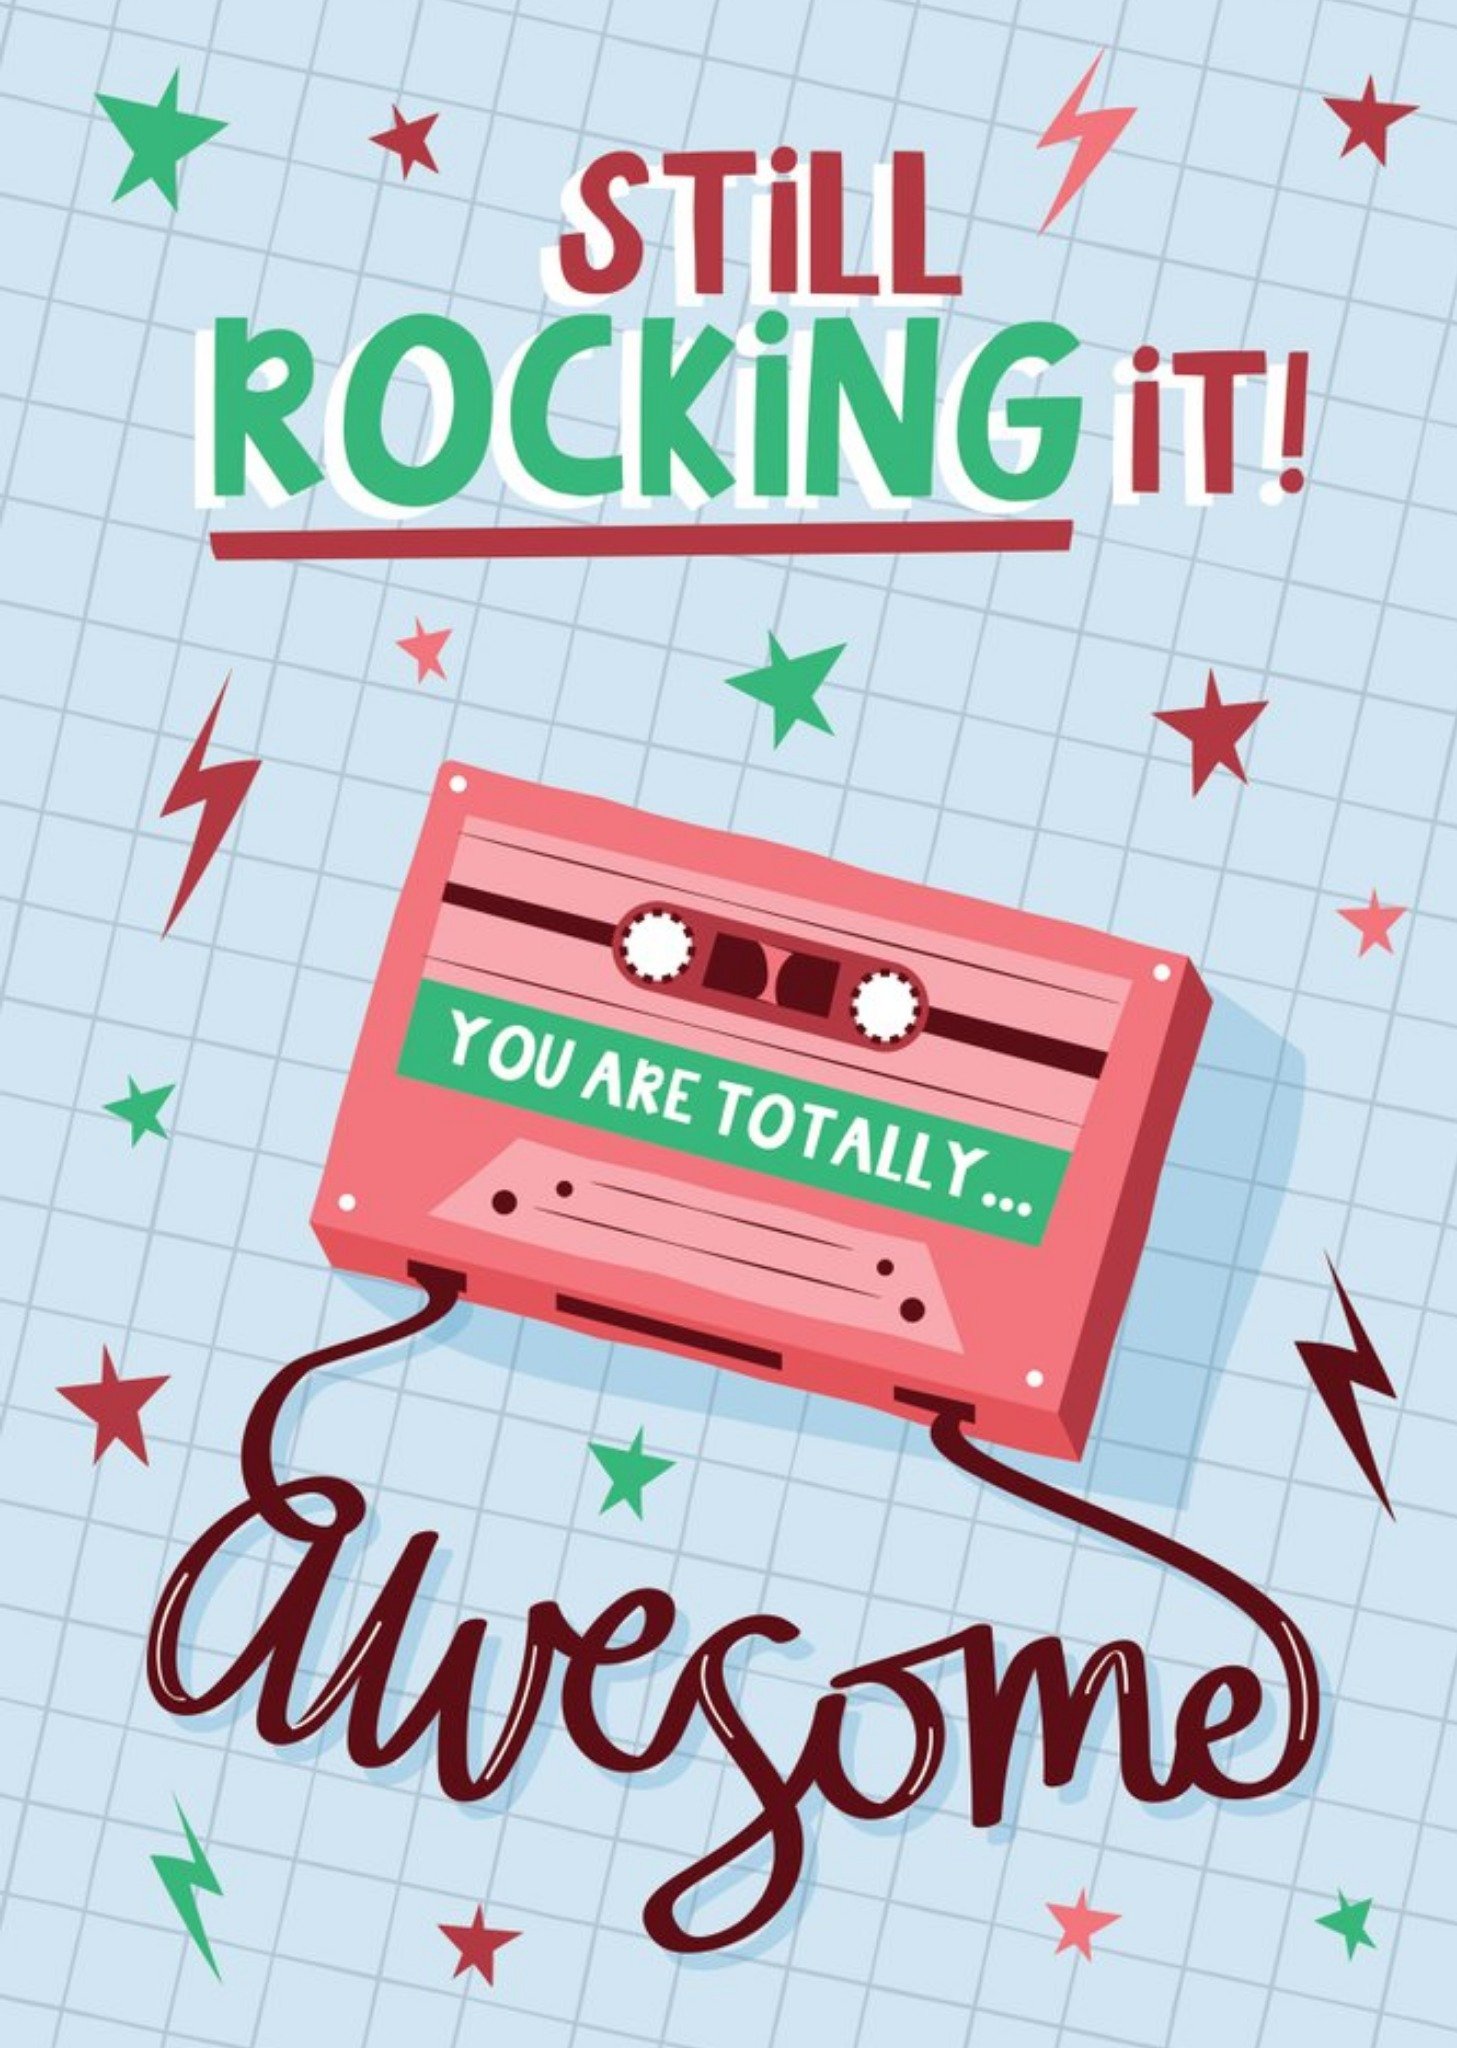 Moonpig Bright Graphic Music Cassette Still Rocking It You Are Totally Awesome Birthday Card, Large